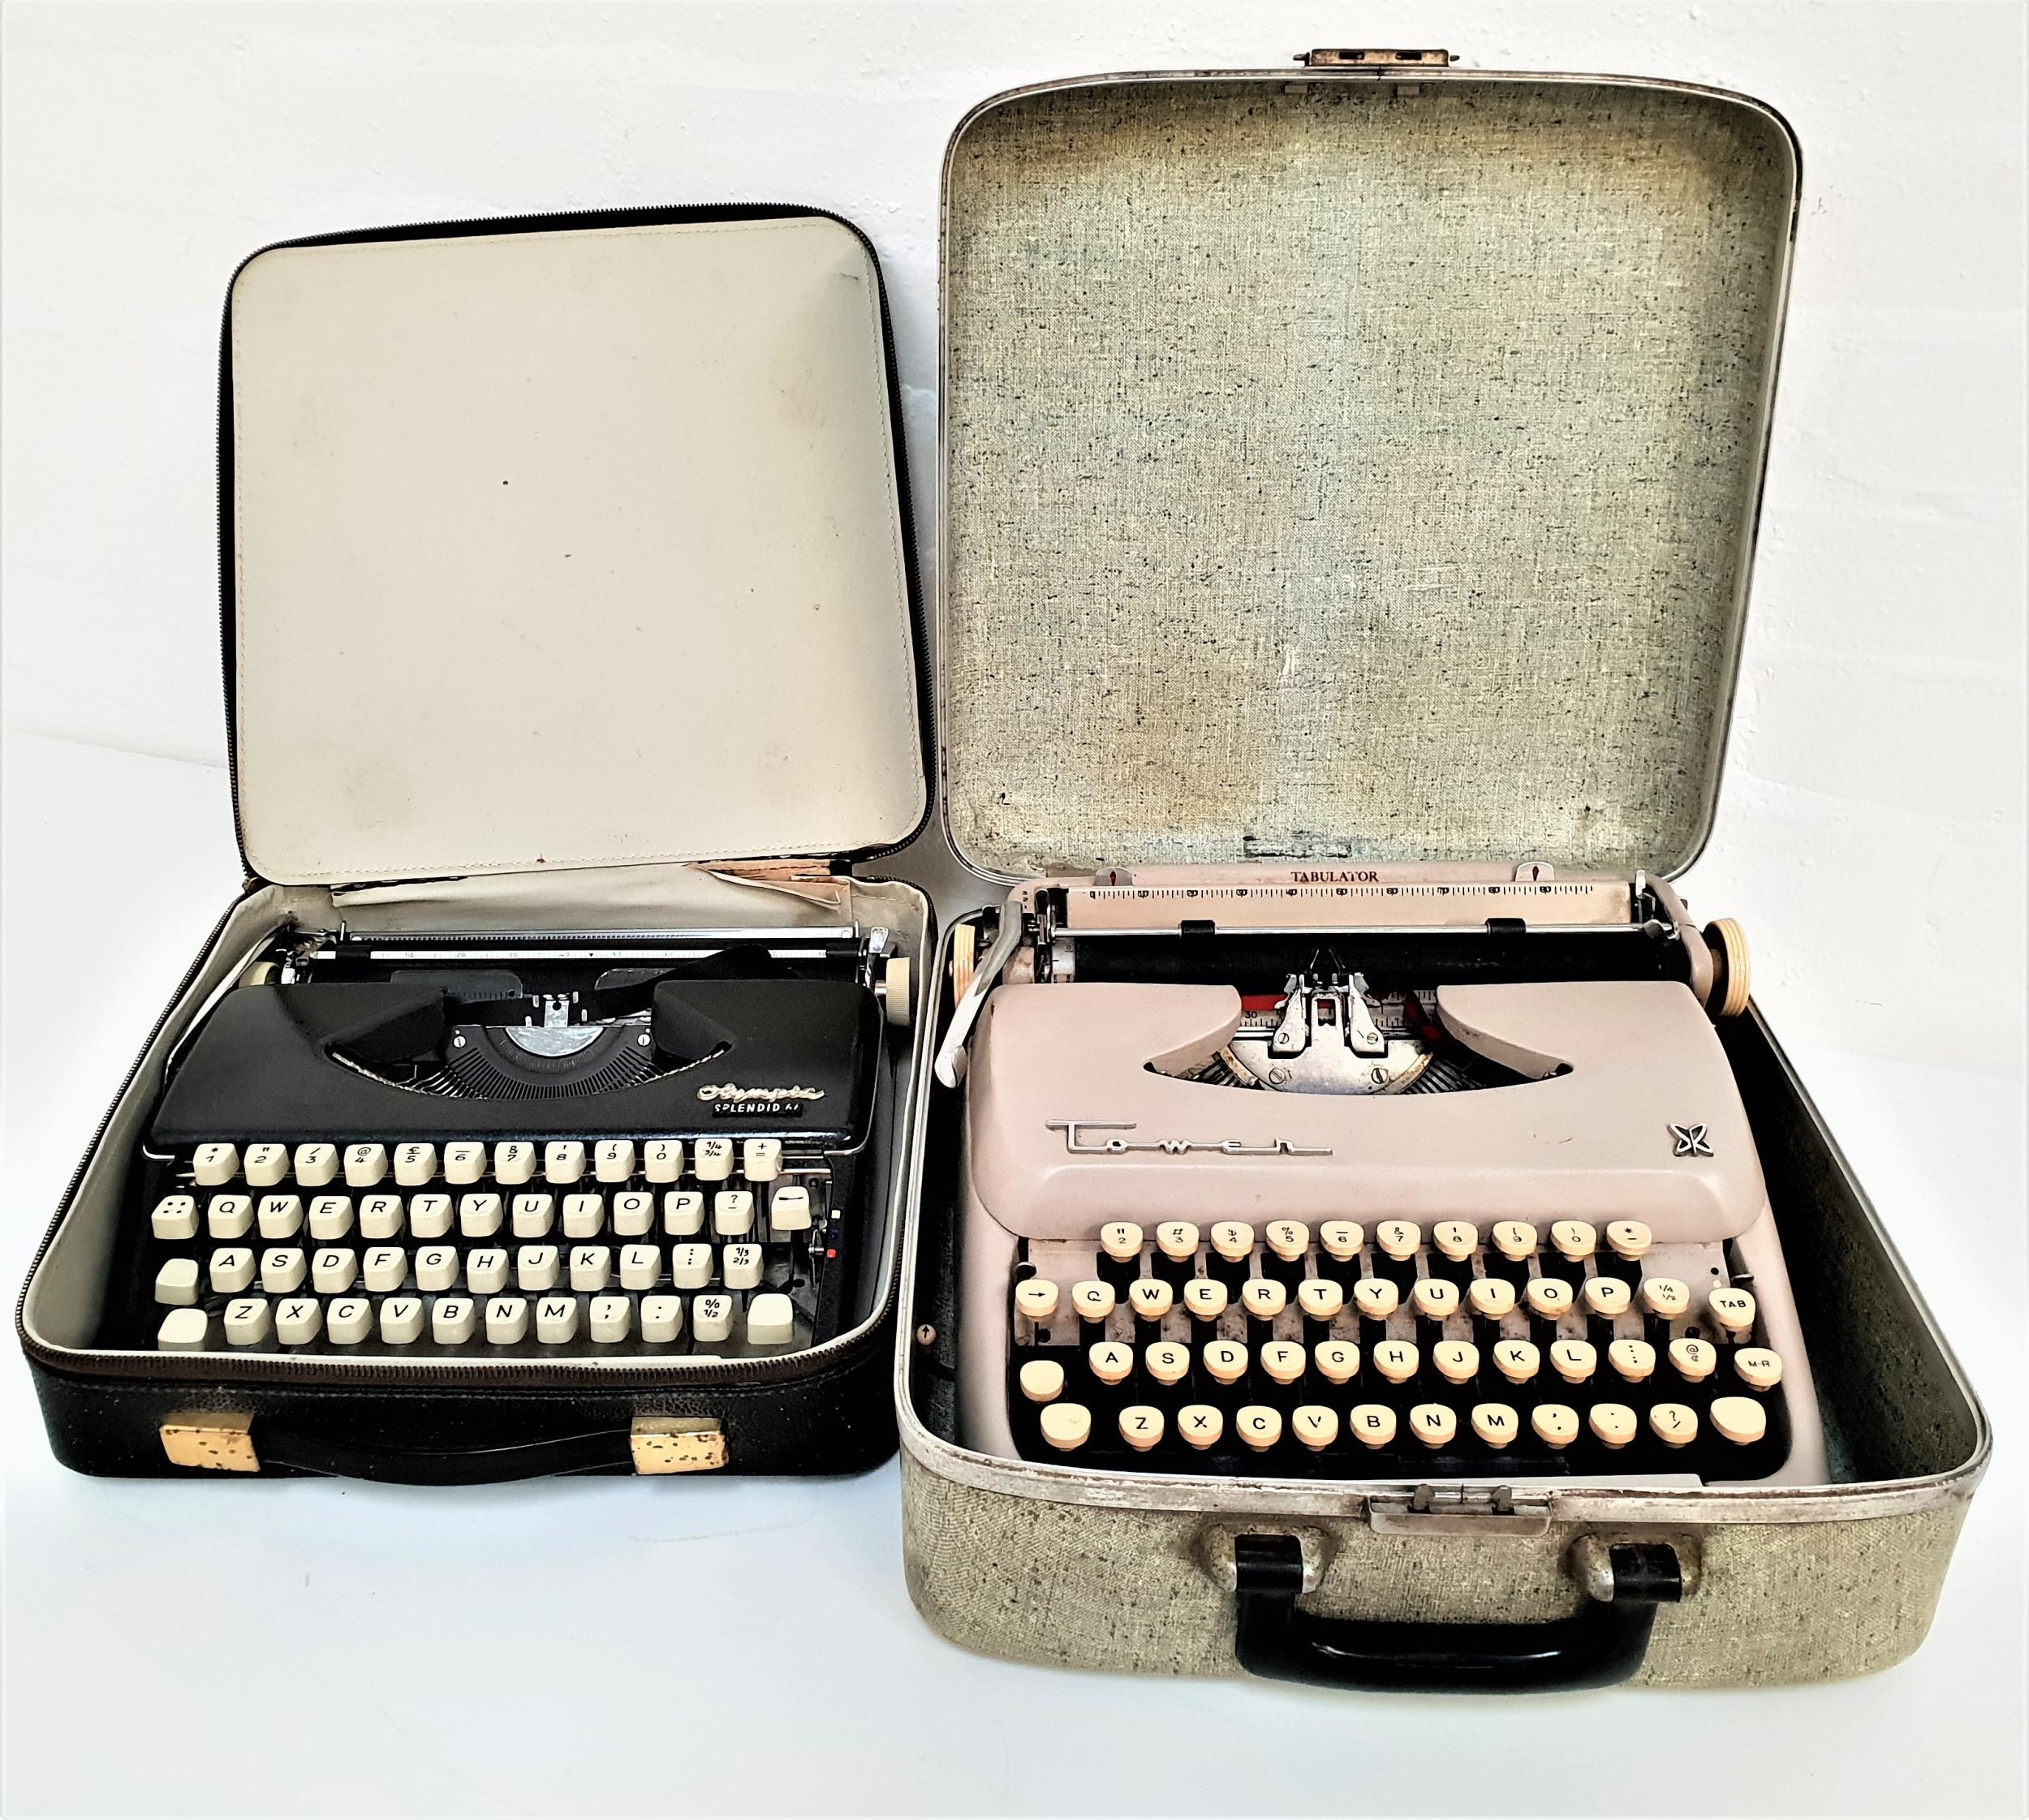 OLYMPIA SPLENDID 66 TYPEWRITER with a black metal body and cream keys, in a zipped travel case,